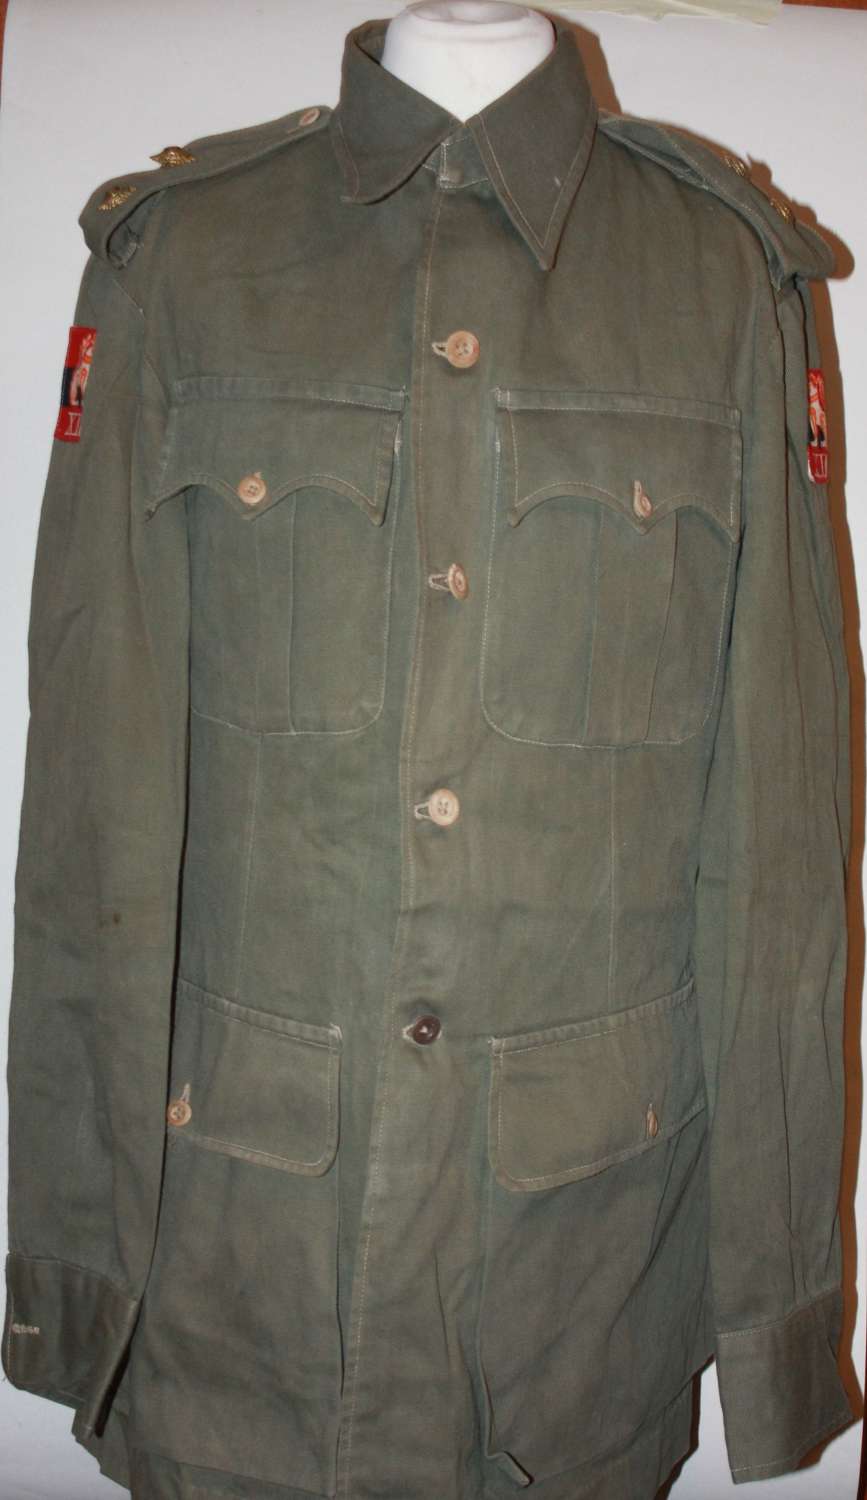 A GOOD USED WWII 12th ARMY JUNGLE GREEN JACKET AND TROUSERS